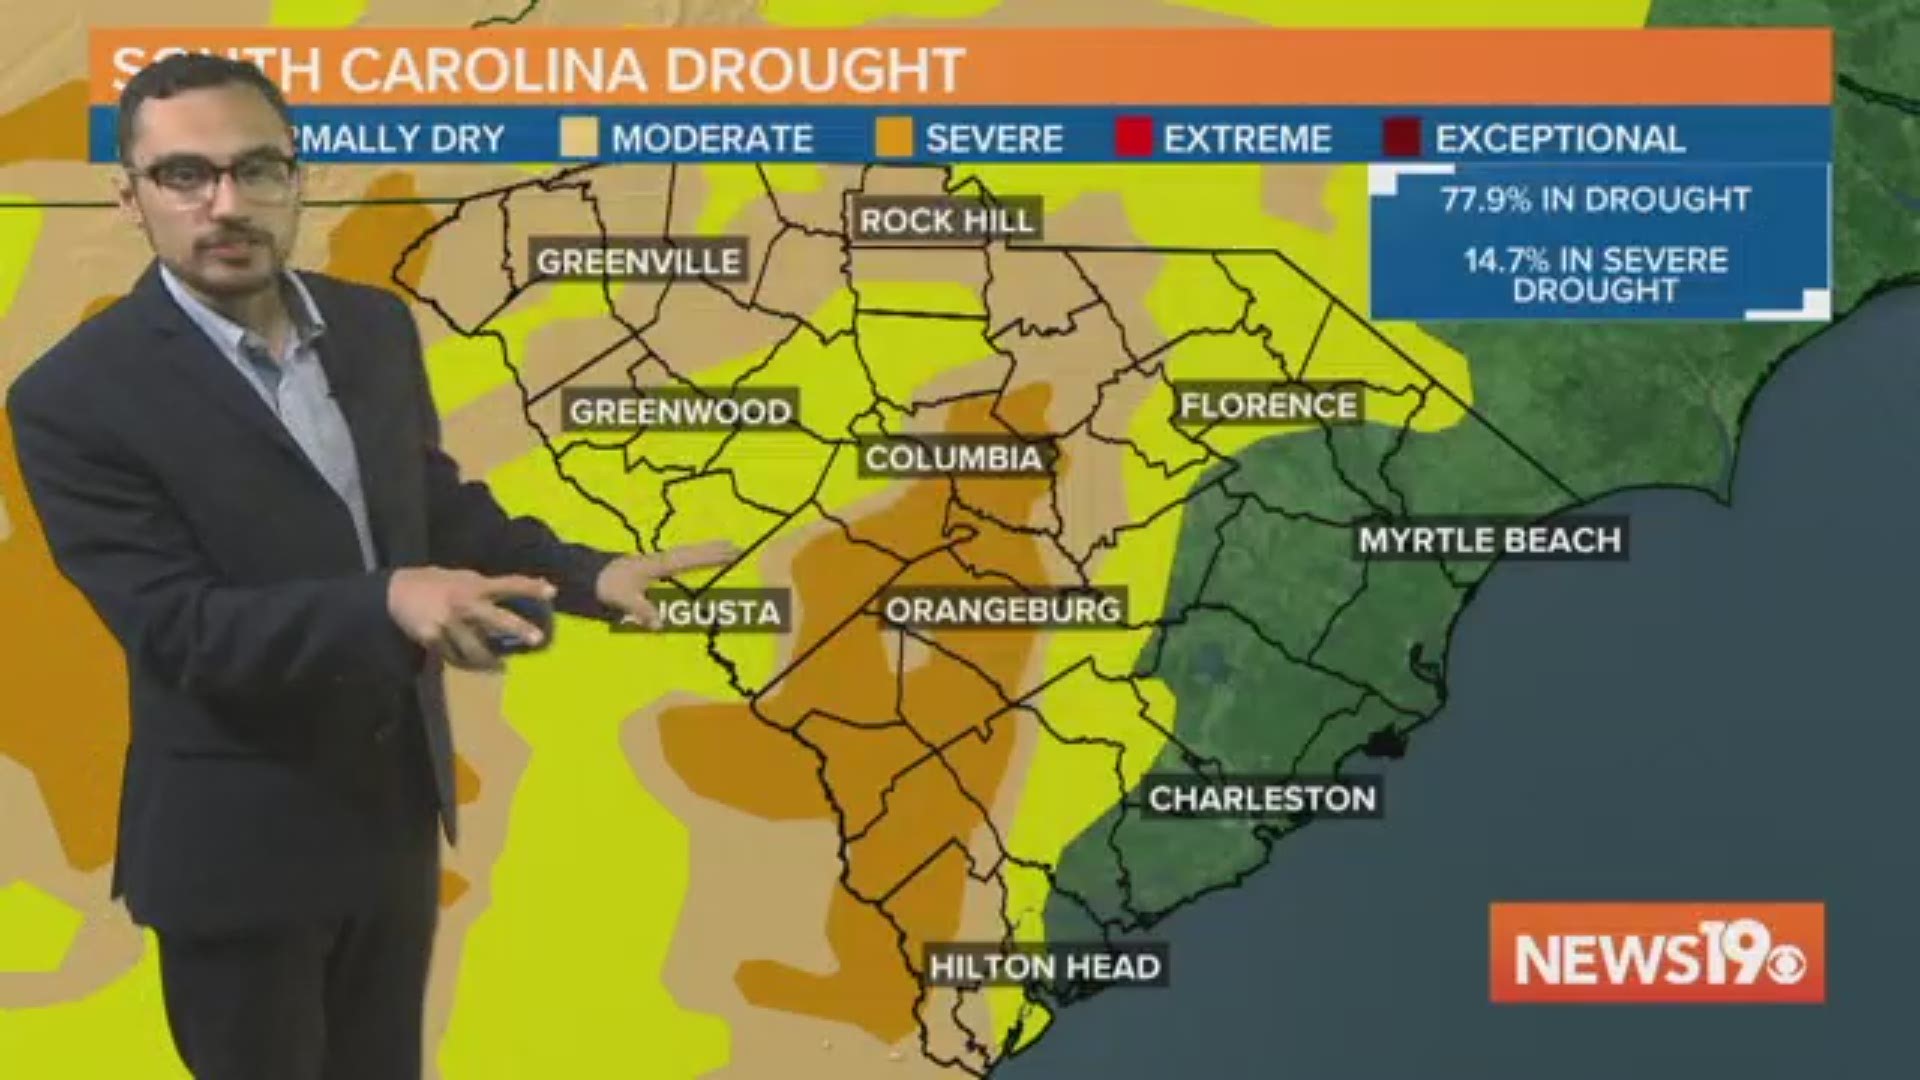 South Carolina's drought is growing as temperatures continue to soar.